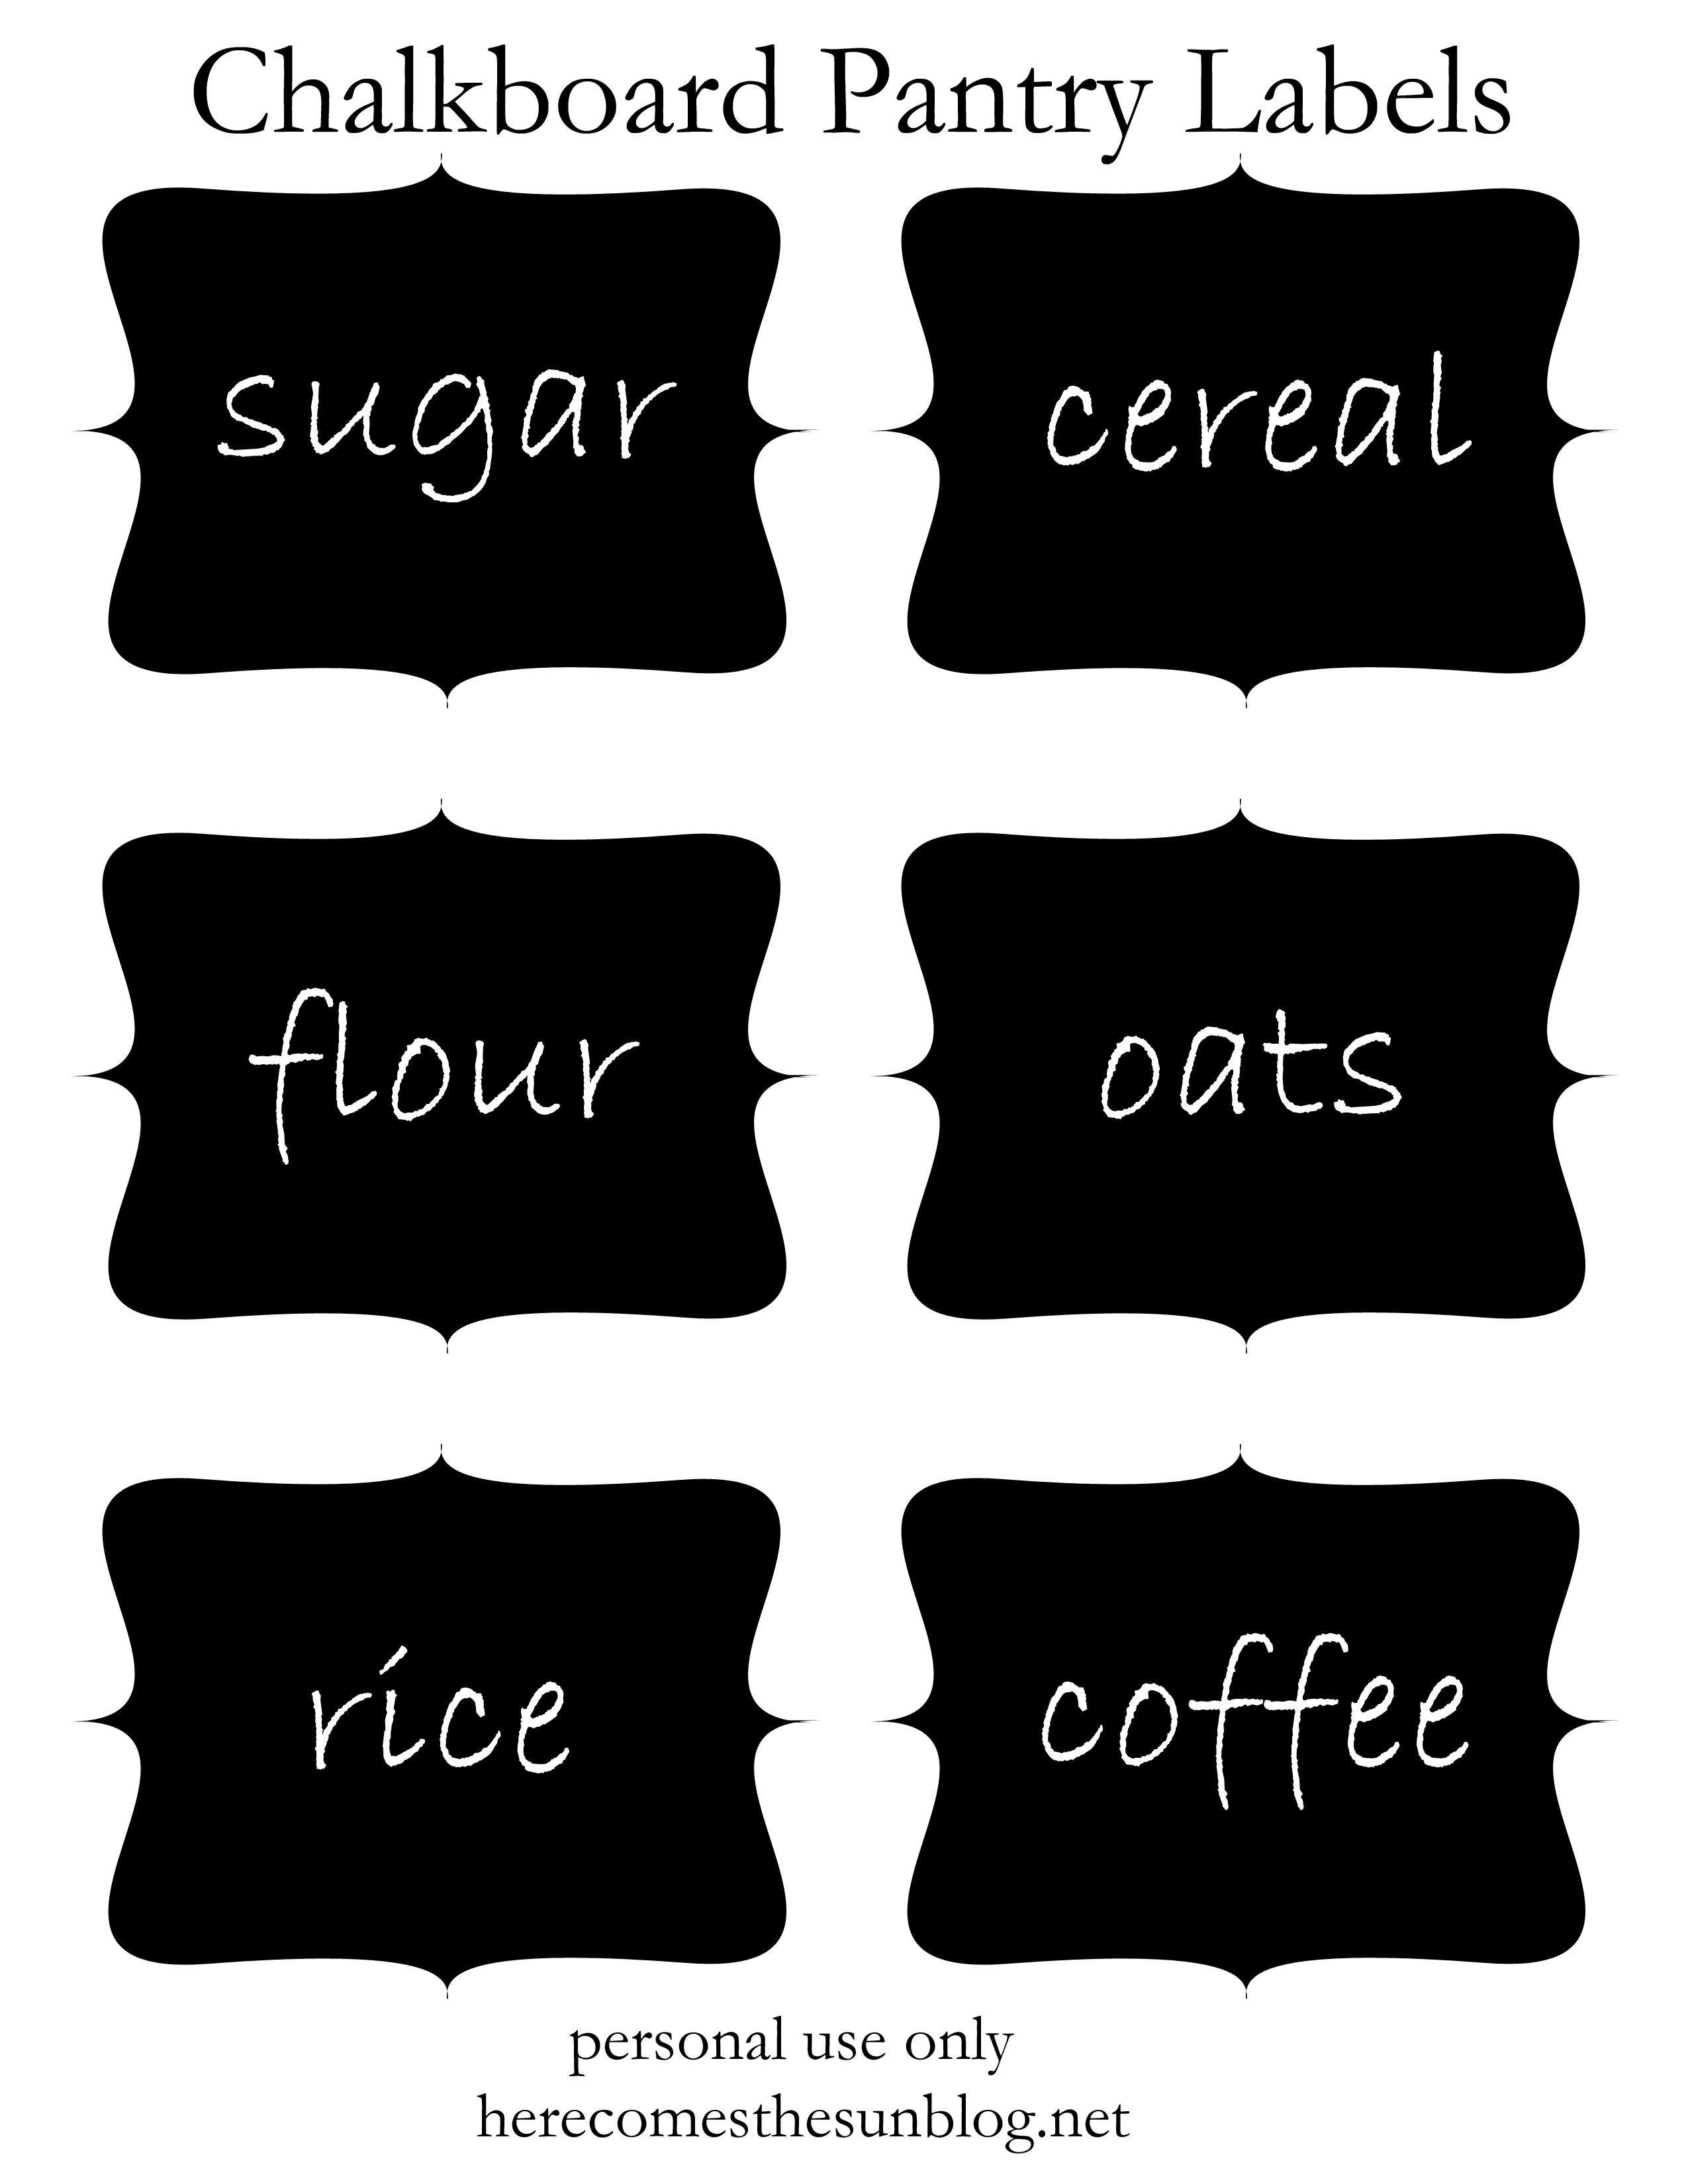 chalkboard pantry labels free printable here comes the sun